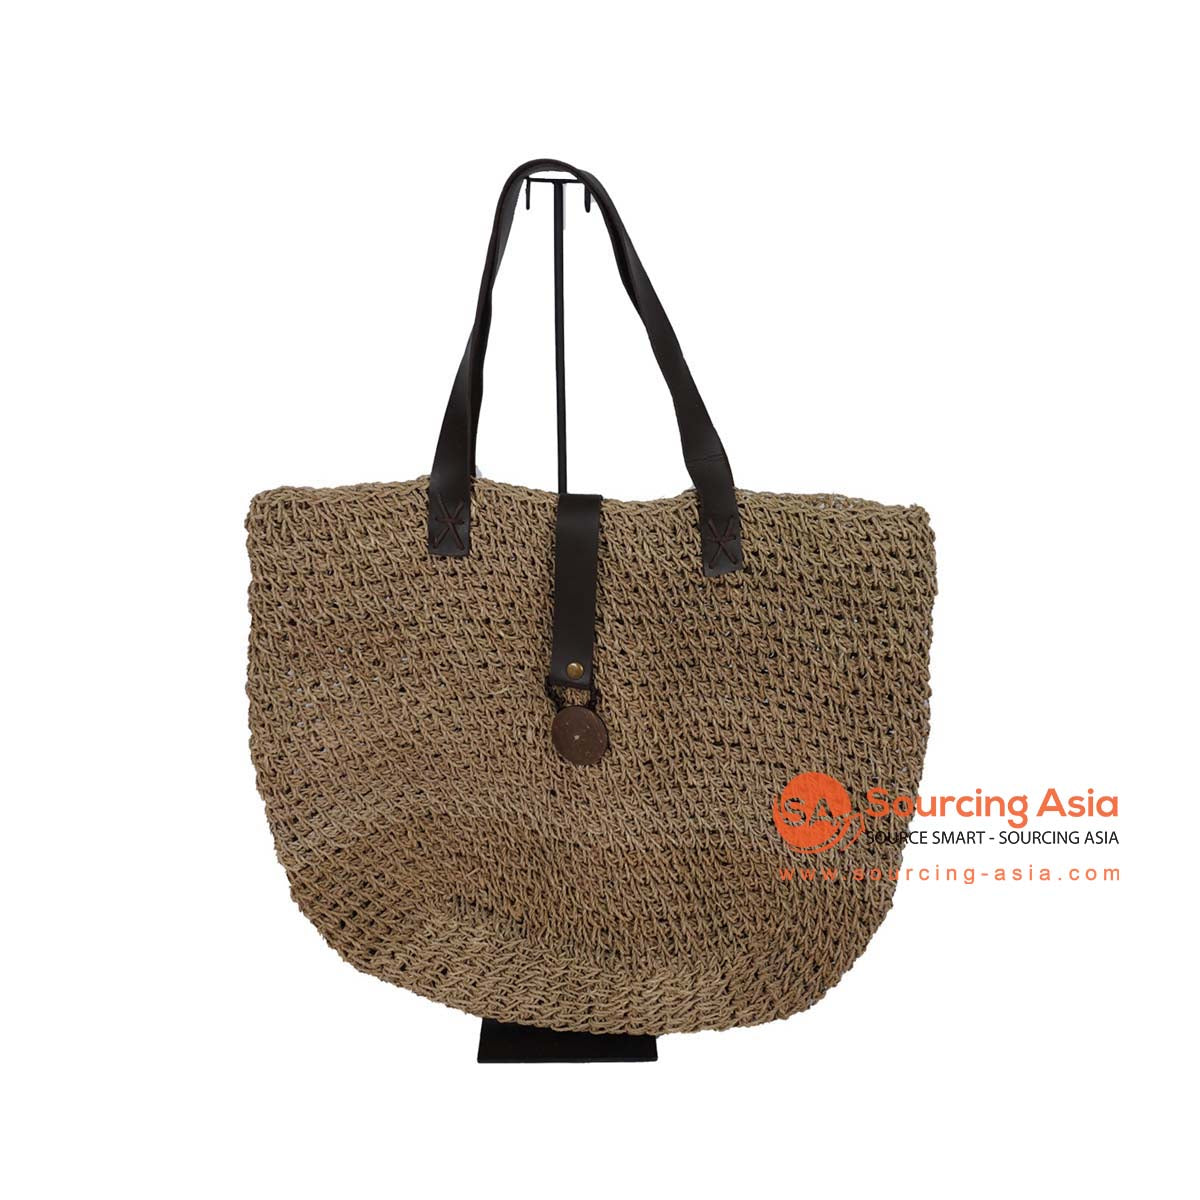 HBSC292 NATURAL AGEL BAG WITH LEATHER HANDLE